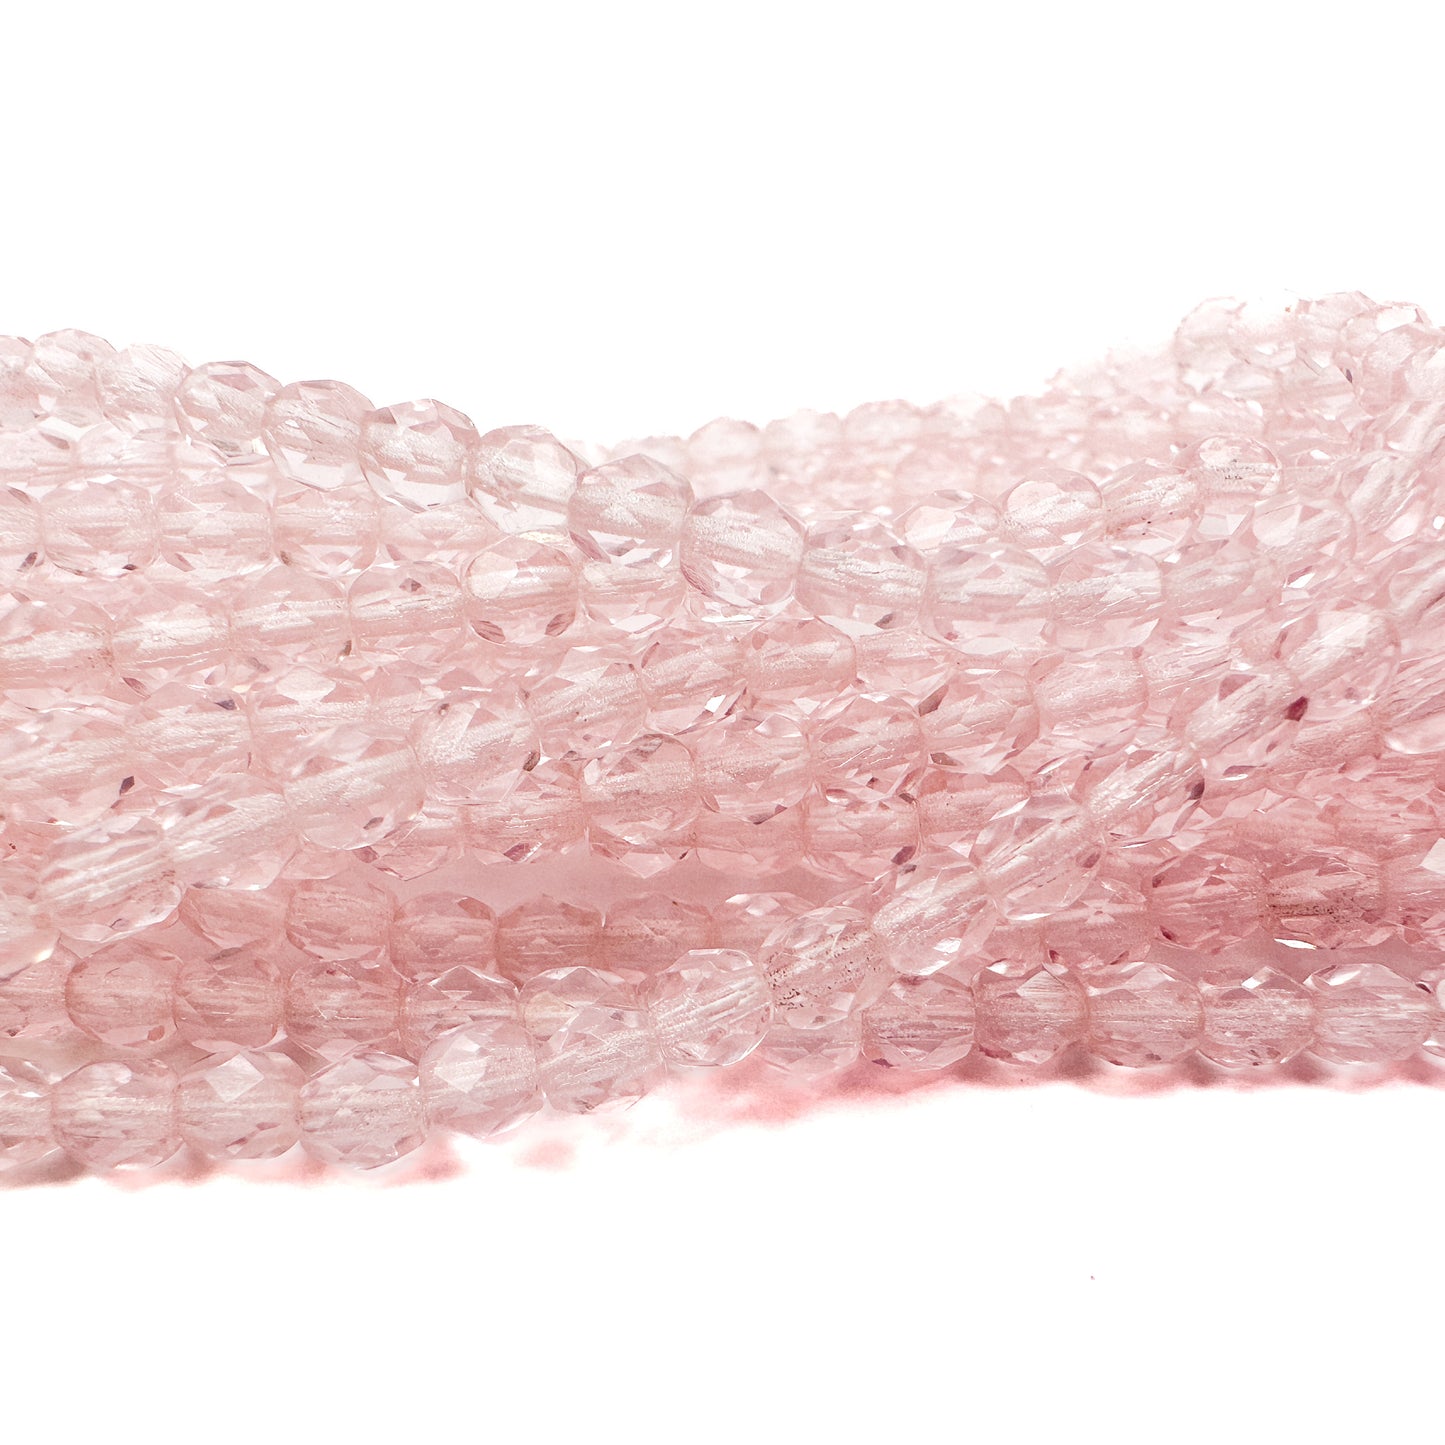 Pink Transparent 4mm Faceted Glass Bead - 50 pcs.-The Bead Gallery Honolulu